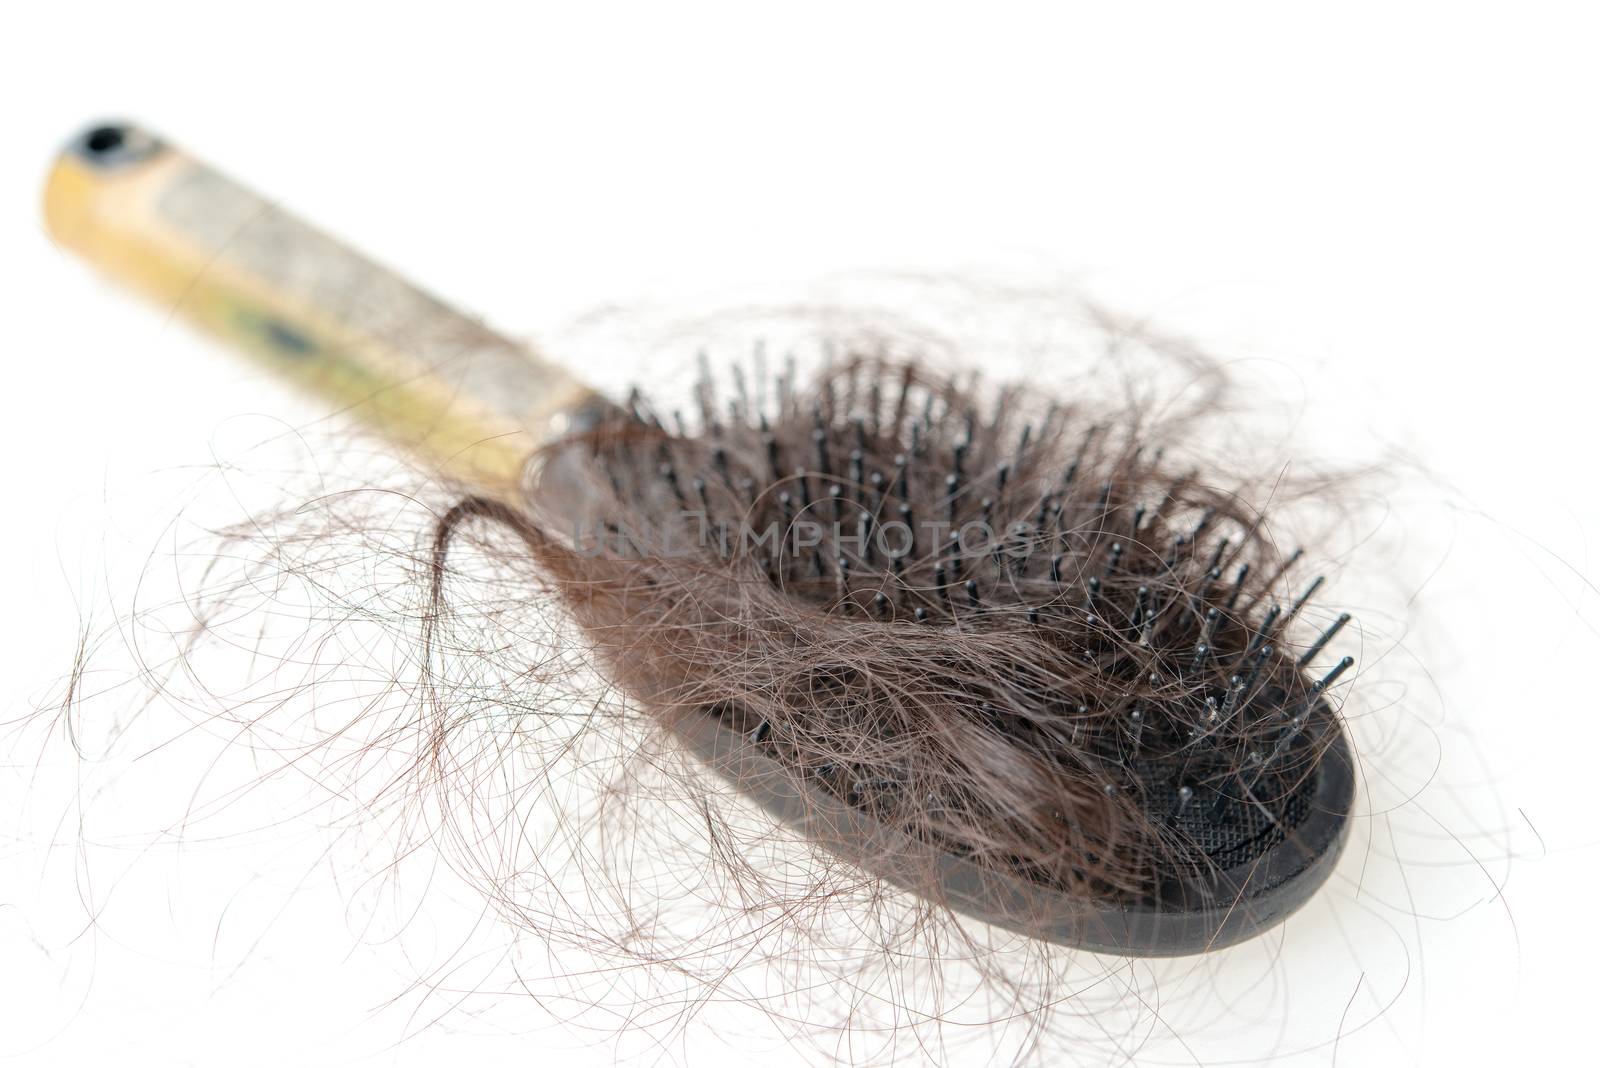 Used dirty hairbrush with lost hair on it, isolated on white background.